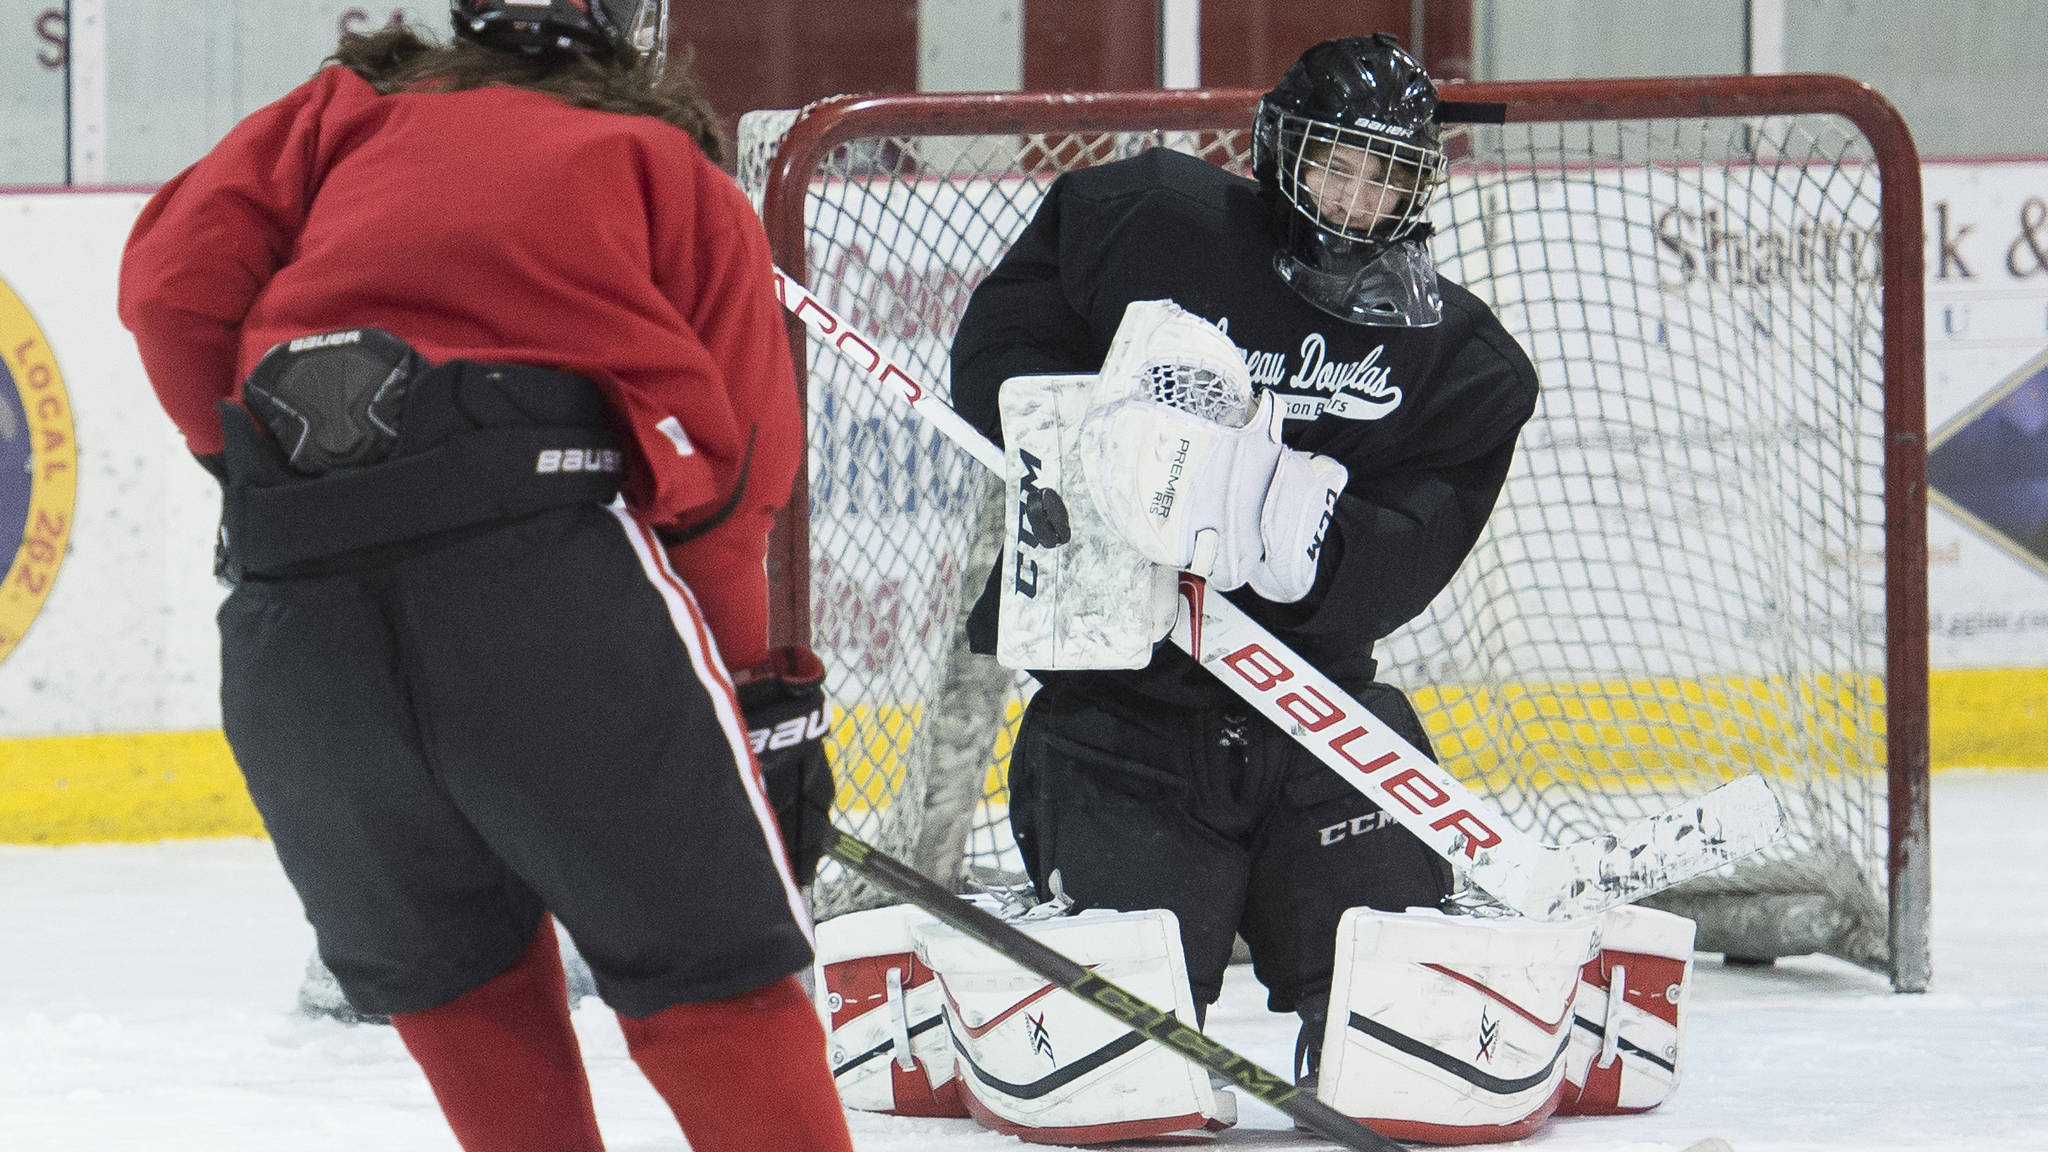 Juneau-Douglas goalie Cody Mitchell deflects a shot by Bill Bosse at a November practice at Treadwell Arena. Mitchell has started in 10 of 13 games for the Crimson Bears this season. (Michael Penn | Juneau Empire File)